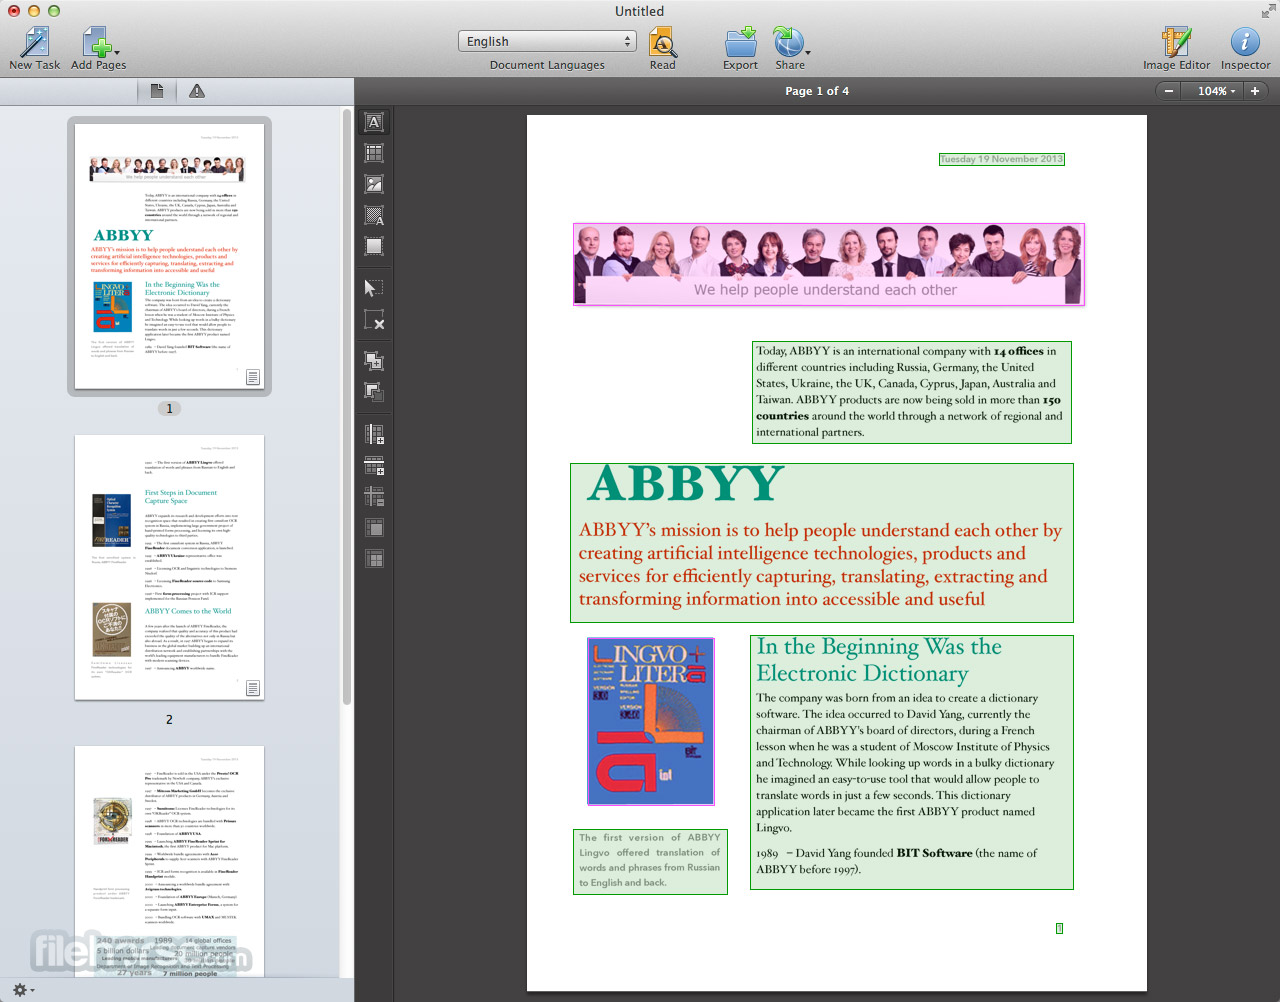 Abby Fine Reader Download For Mac